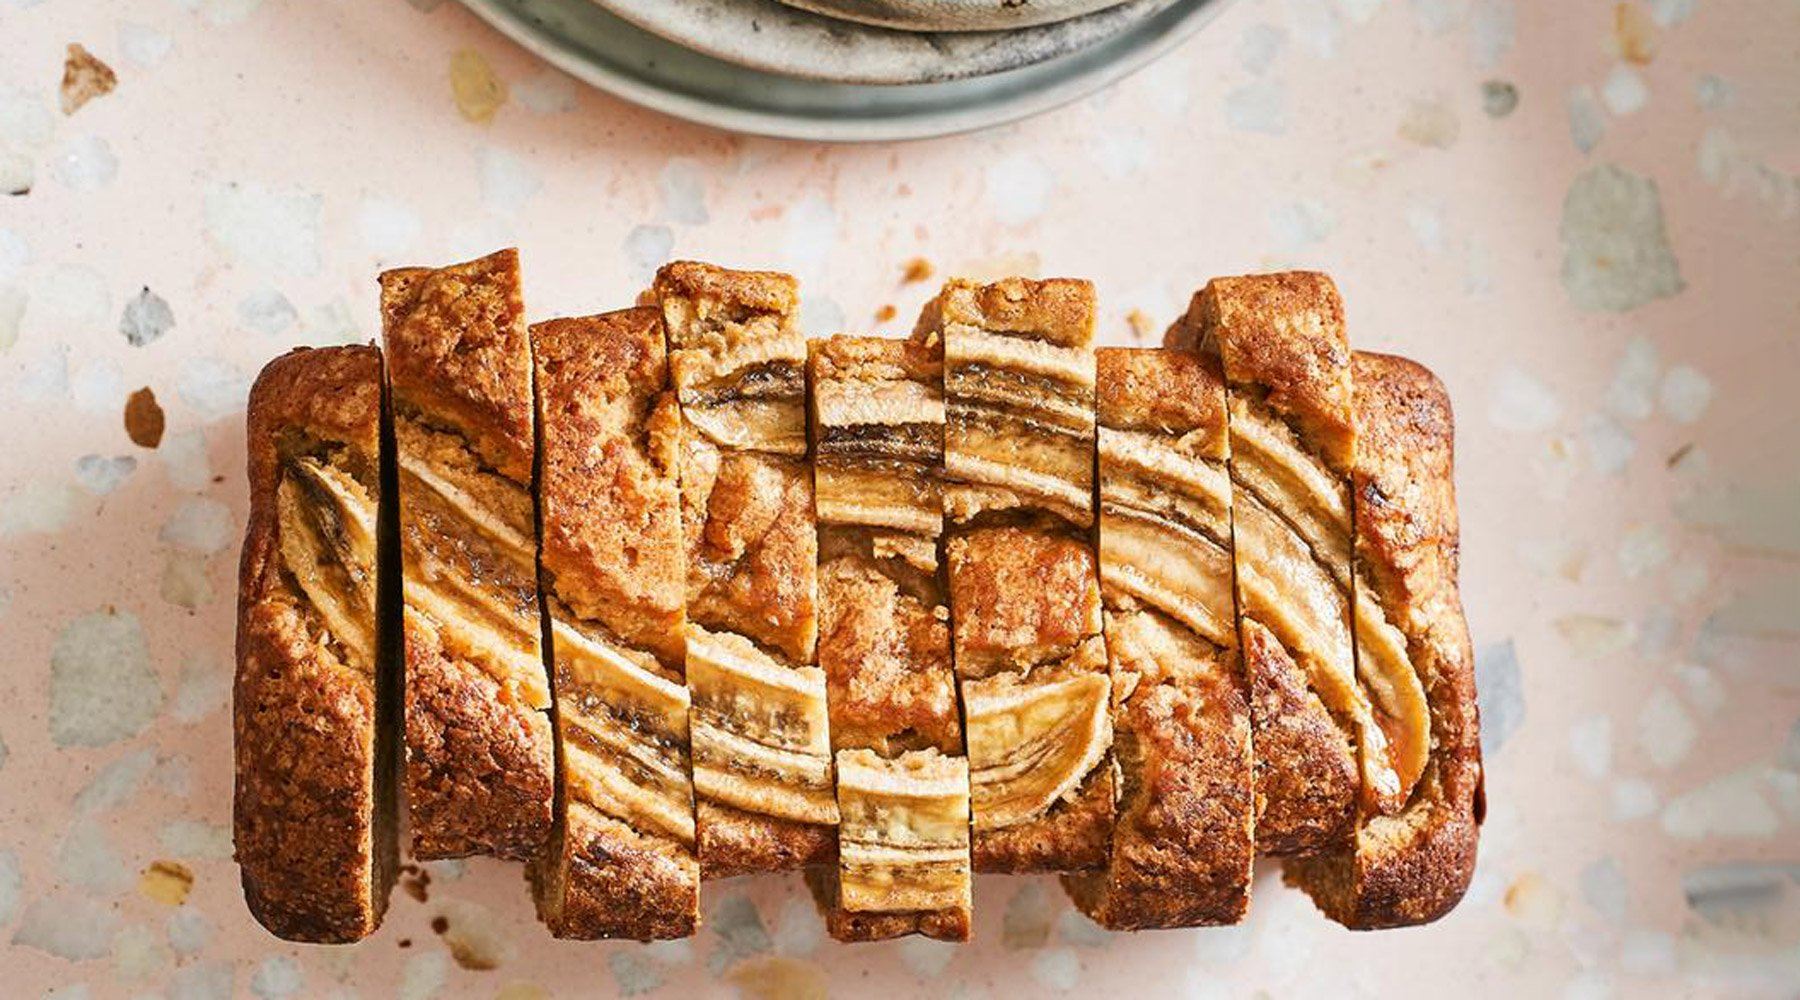 Vegan Banana Bread Recipe from Lucy Lord